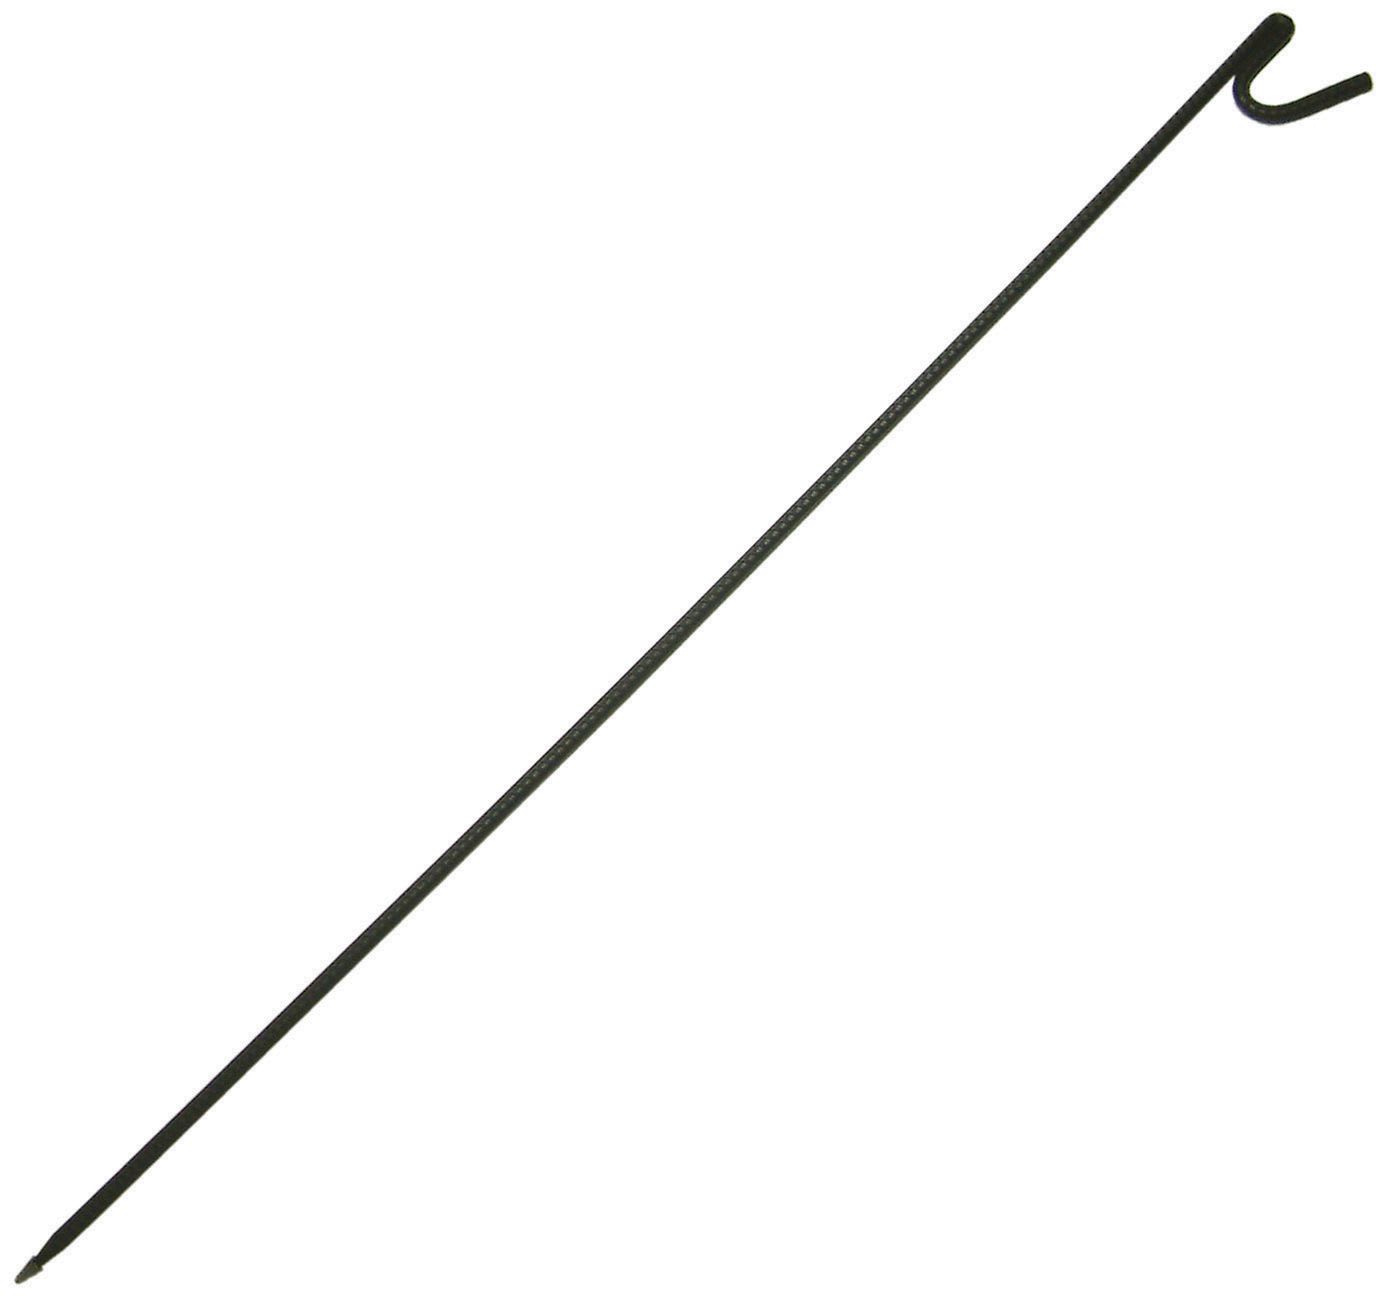 Fencing Pin 12mm x 1300mm Pack of 5 | Wickes.co.uk